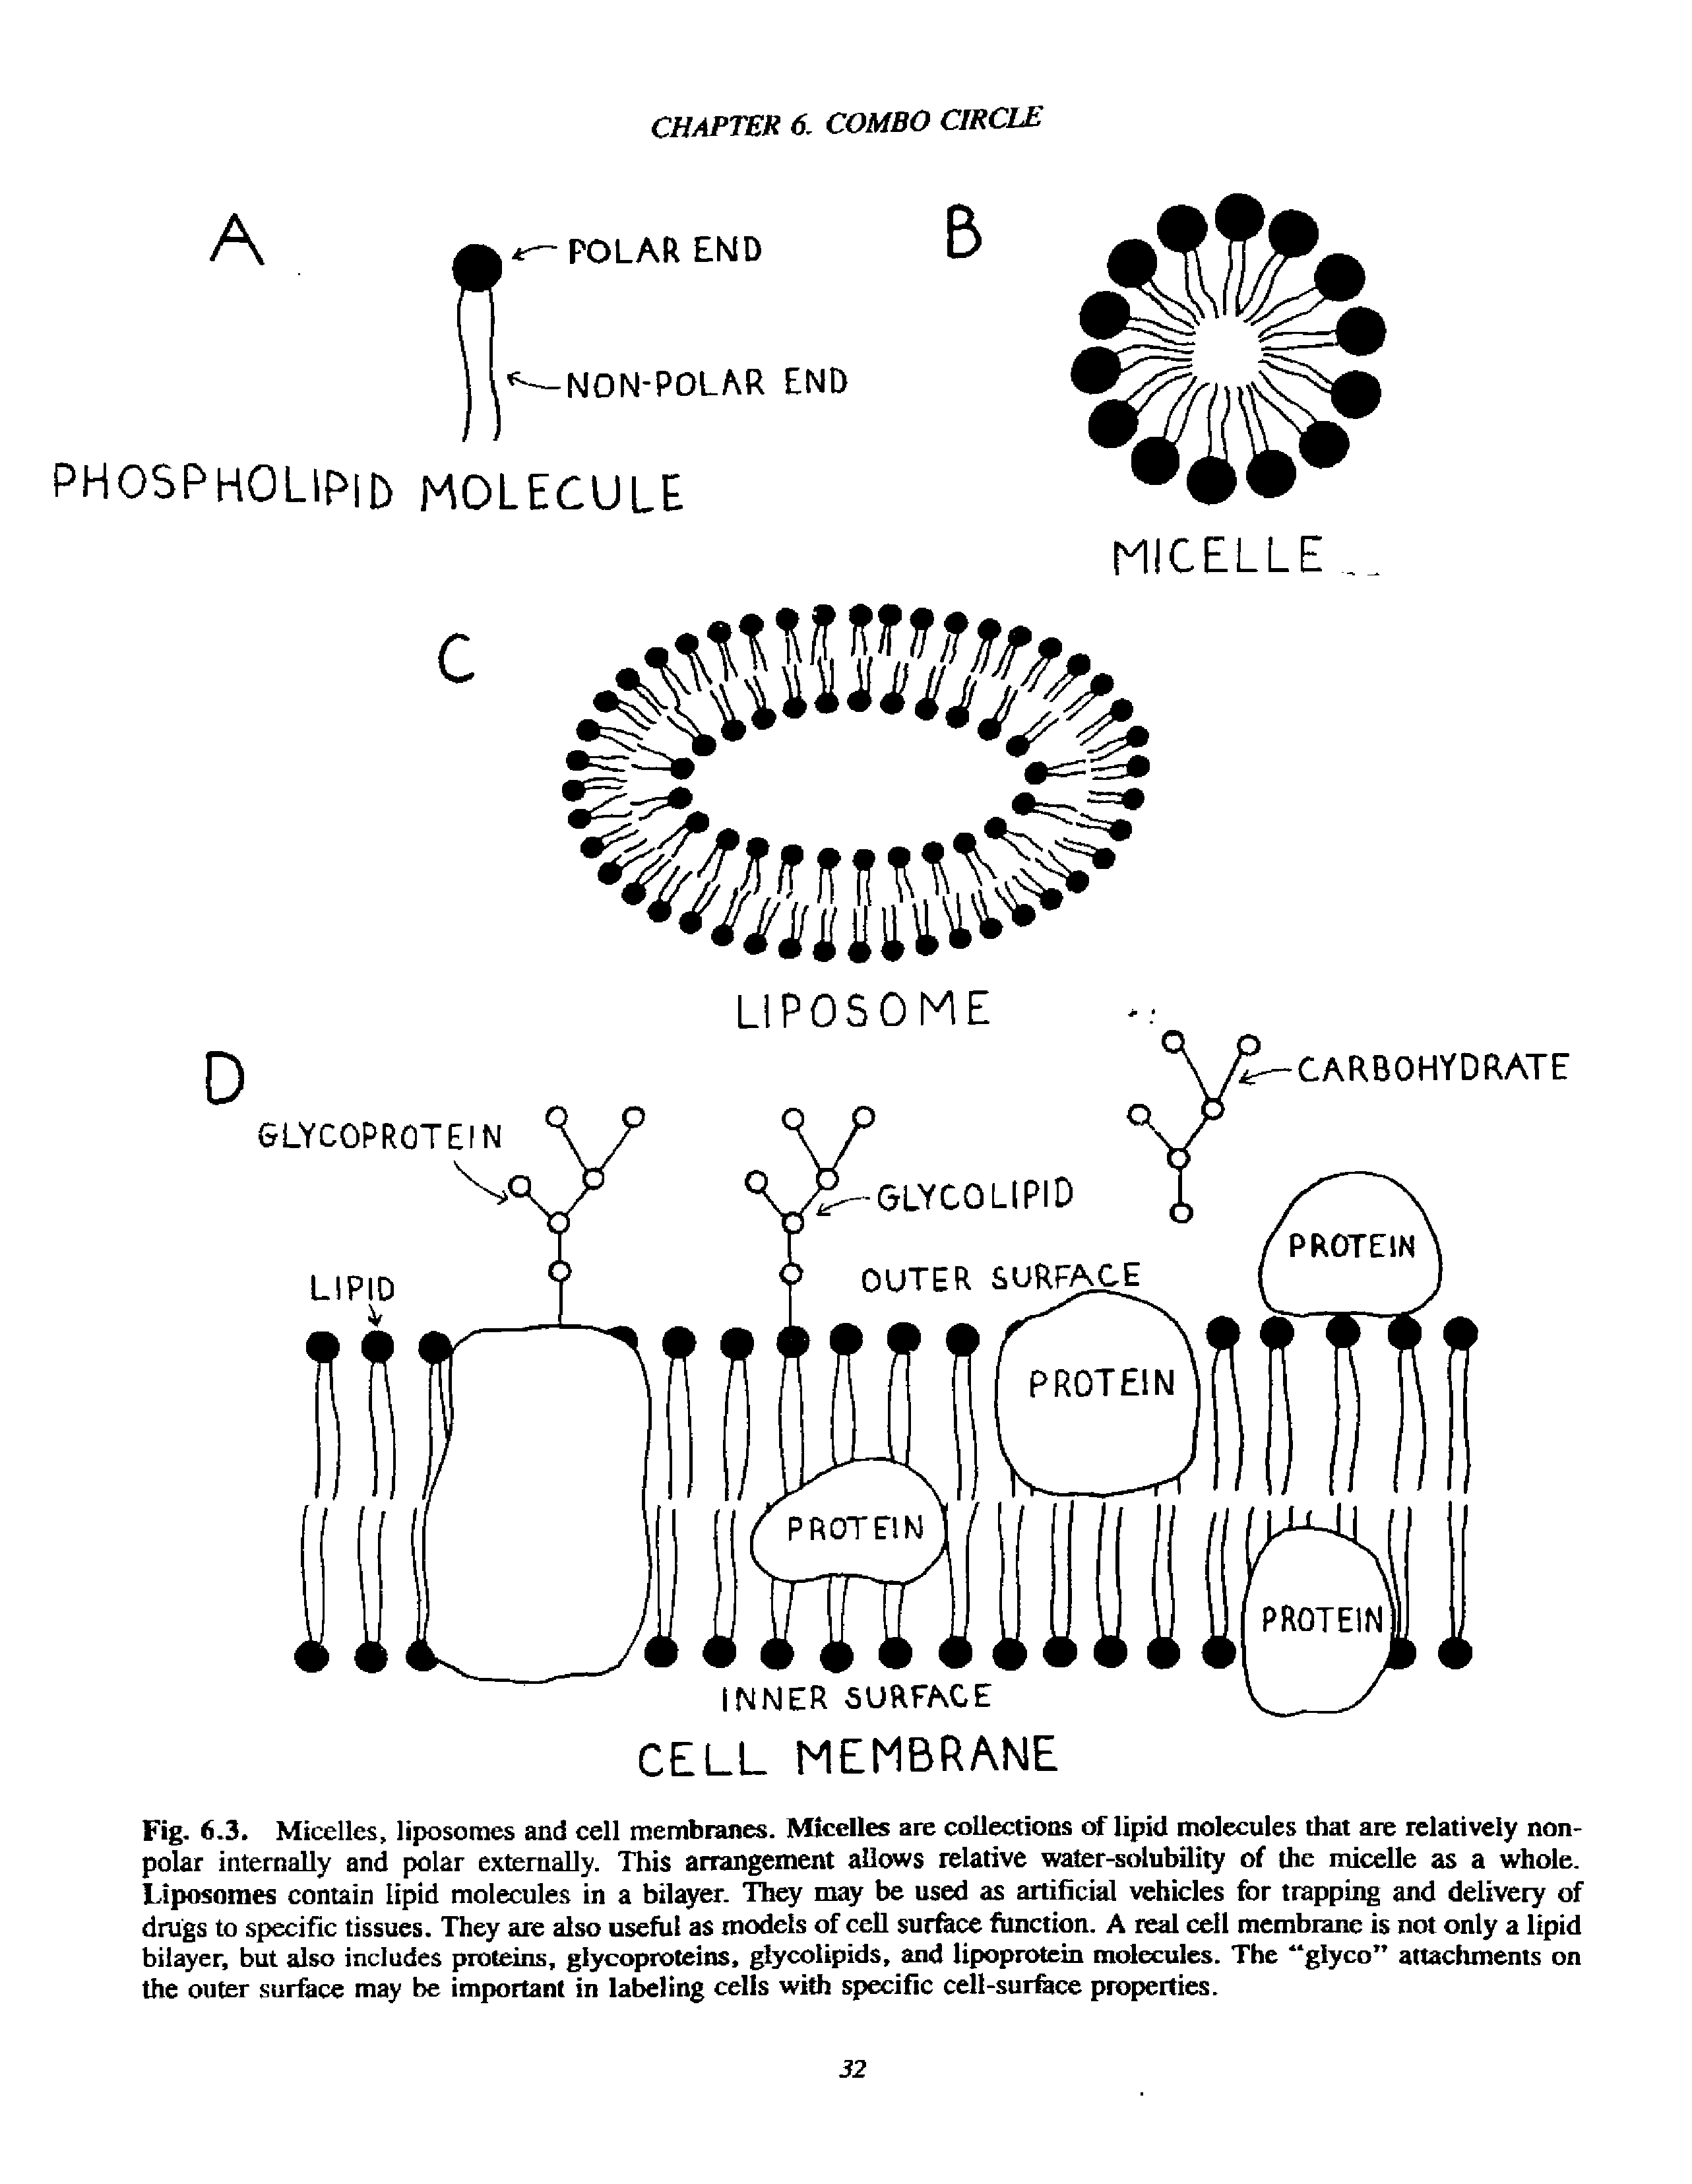 Fig. 6.3. Micelles, liposomes and cell membranes. Micelles are collections of lipid molecules that are relatively nonpolar internally and polar externally. This arrangement allows relative water-solubility of the micelle as a whole. Liposomes contain lipid molecules in a bilayer. They may be used as artificial vehicles for trapping and delivery of drugs to specific tissues. They are also useful as models of cell surfiice function. A real cell membrane is not only a lipid bilaycr, but also includes proteins, glycoproteins, glycolipids, and lipoprotein molecules. The glyco attachments on the outer surface may be important in labeling cells with specific cell-surfece properties.